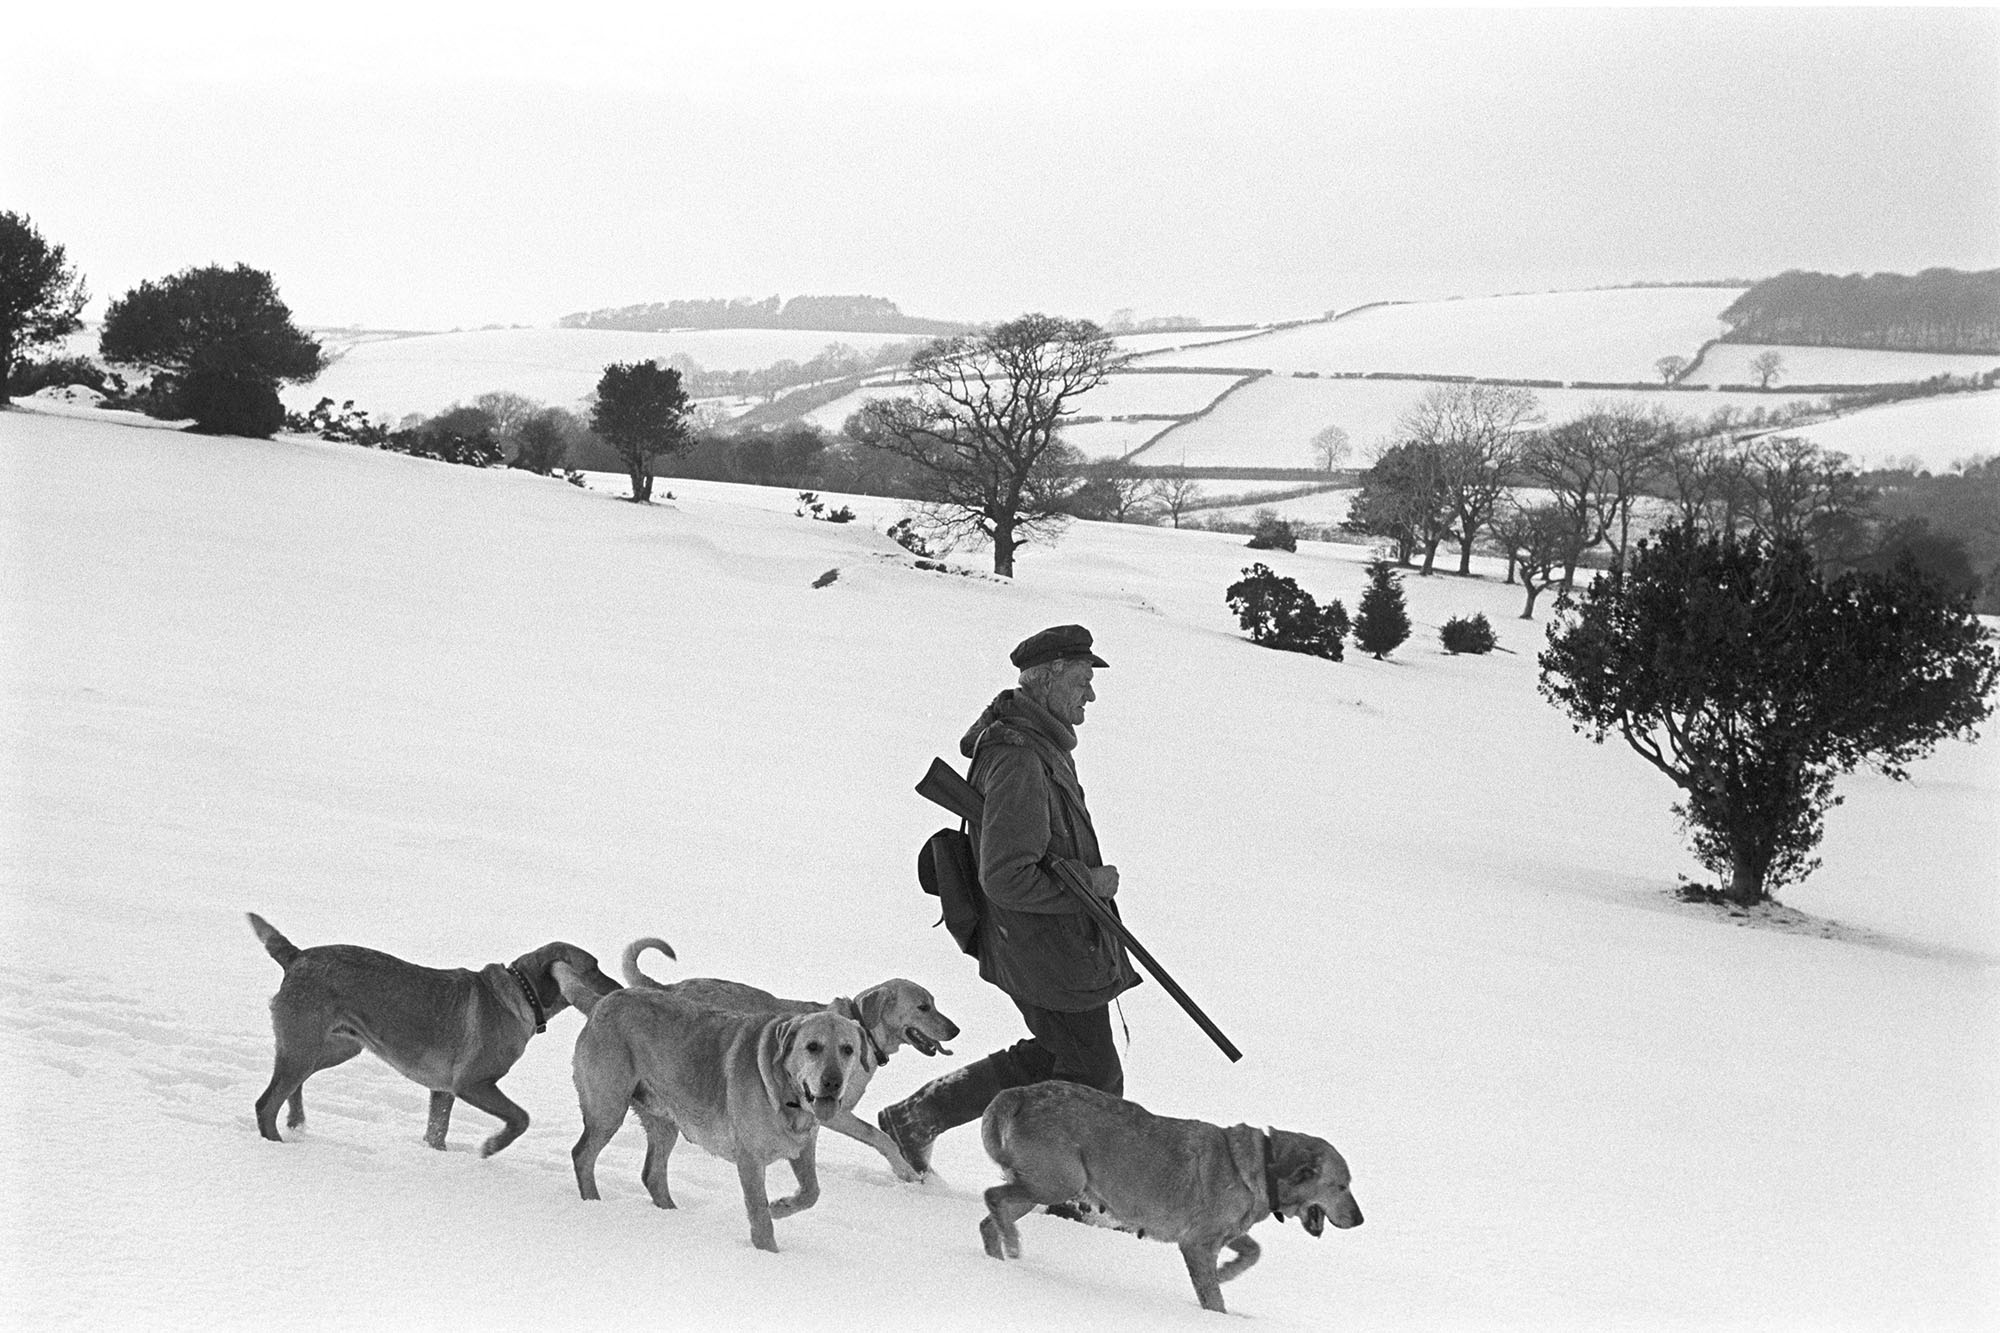 Snow, man shooting with dogs walking through snow. 
[William Kelly shooting in a snow covered field, in Okehampton, with four dogs. A snow covered landscape of fields, trees and hedges can be seen in the background.]